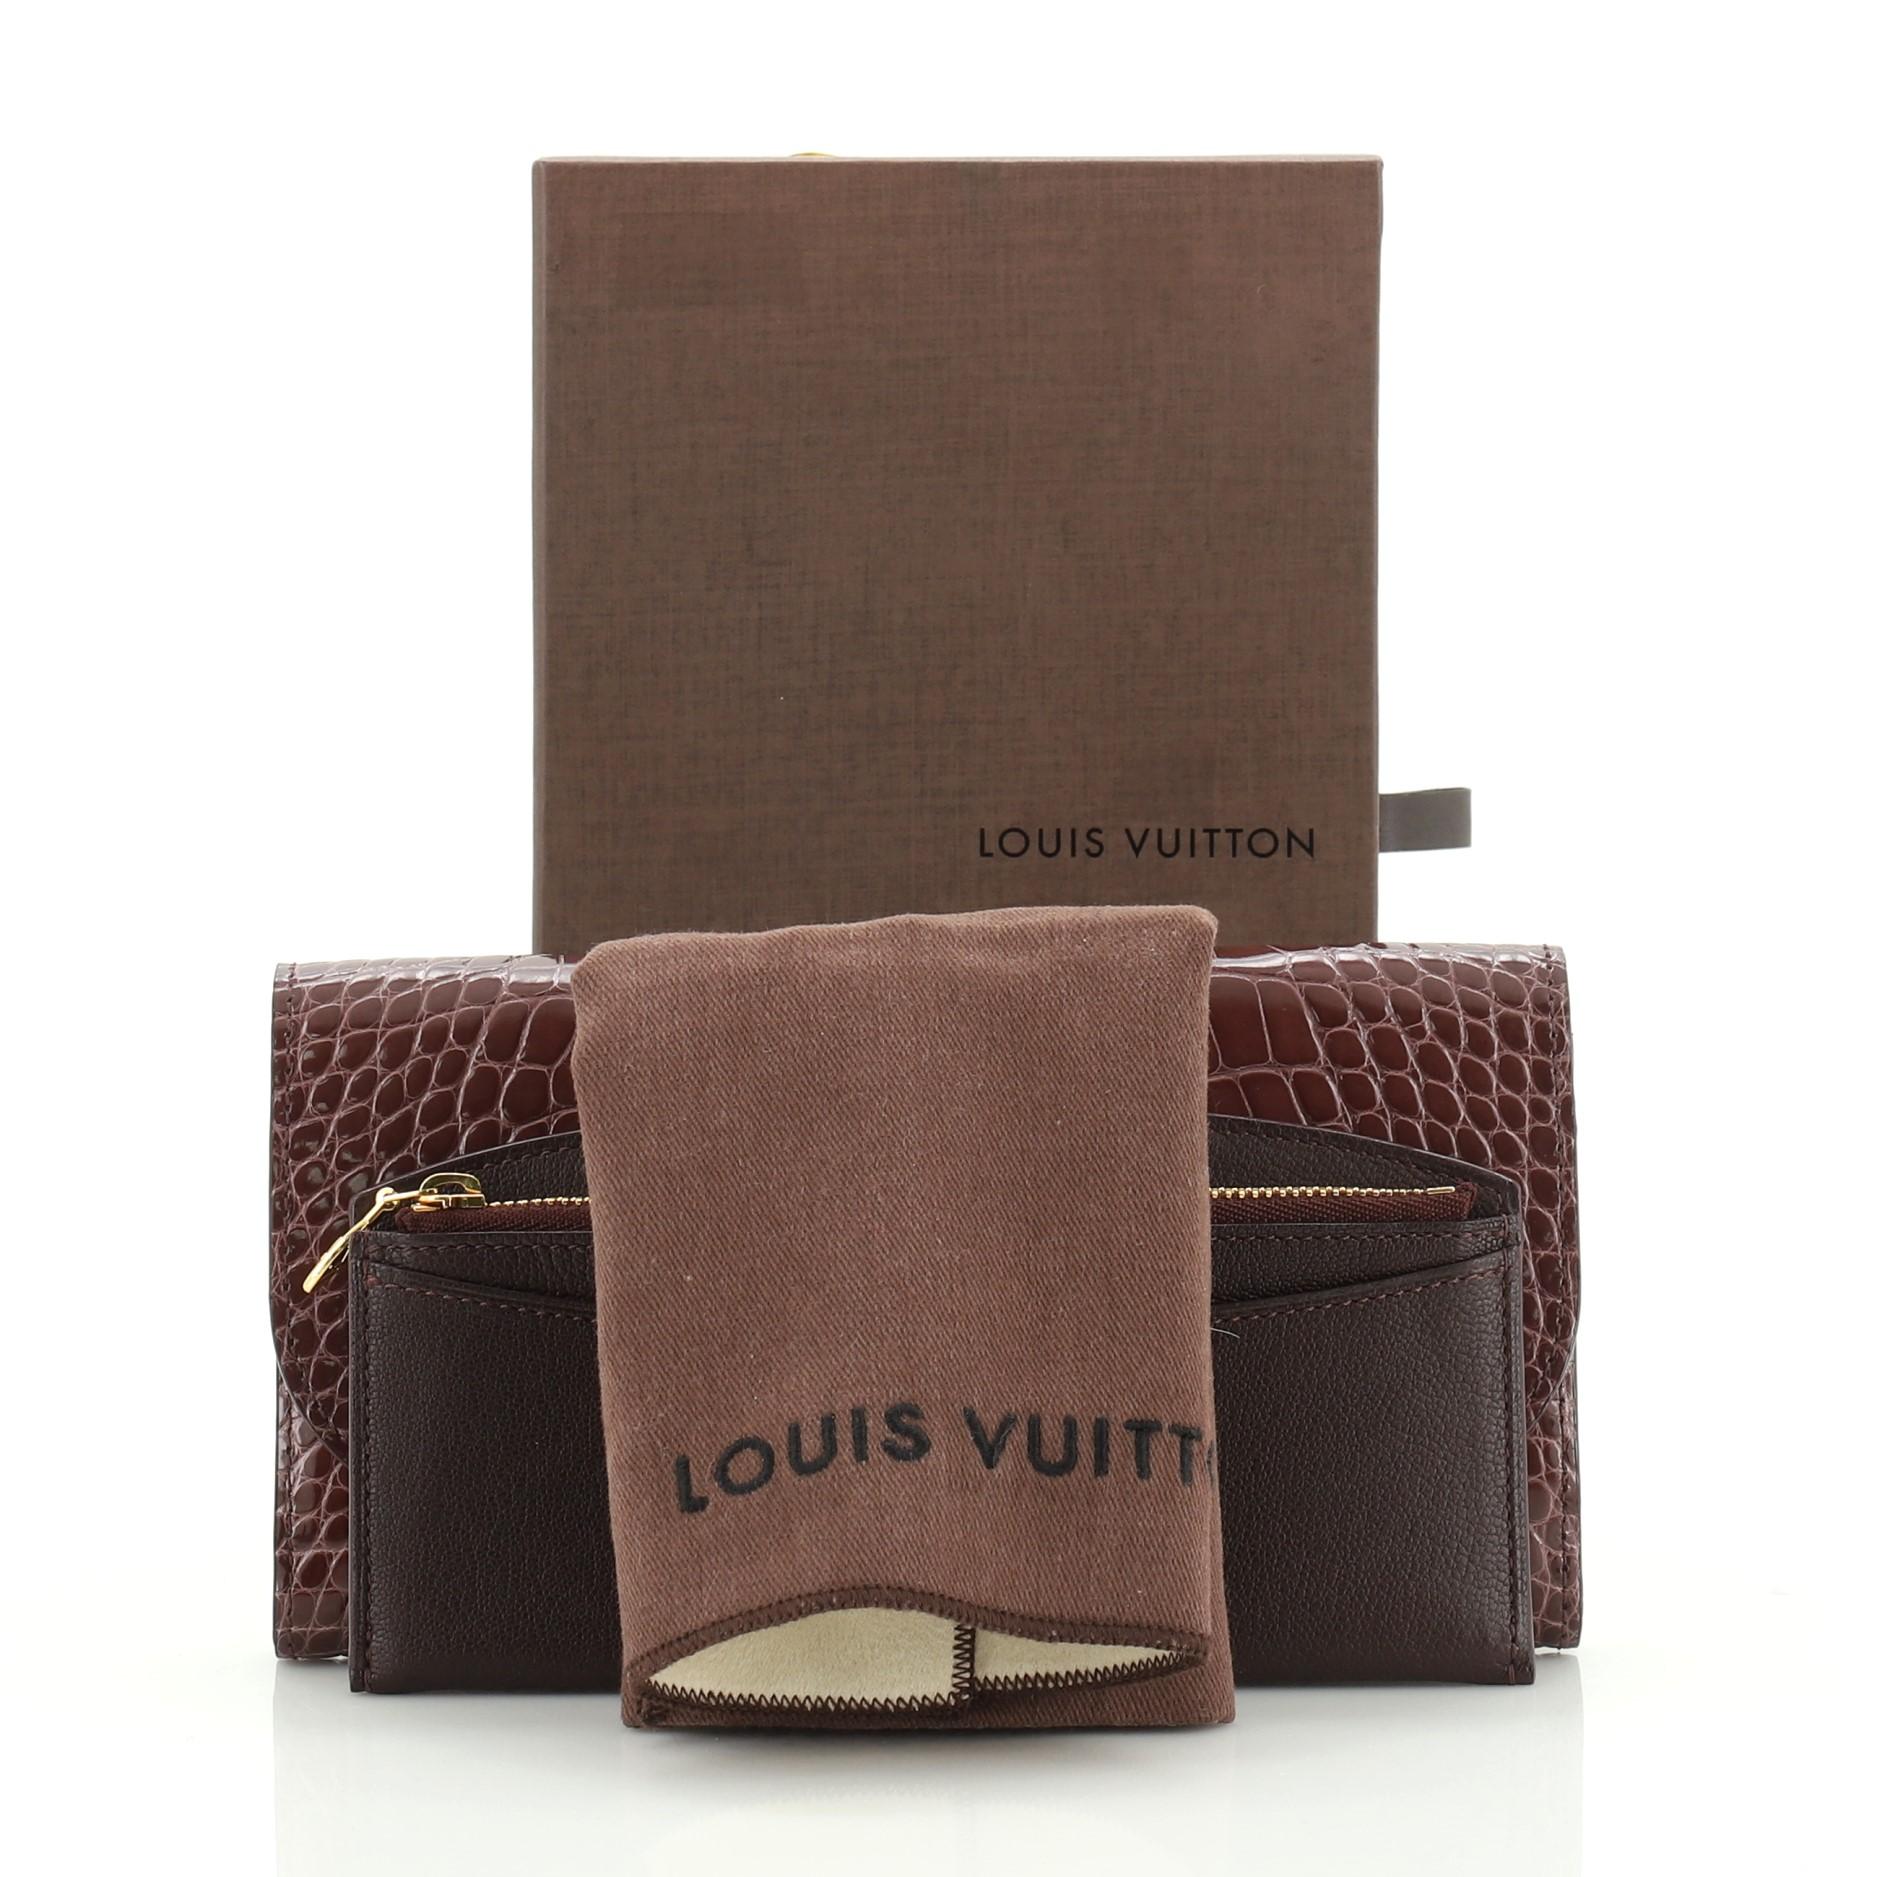 This Louis Vuitton Vivienne LV Wallet Alligator Long, crafted from genuine purple alligator, features an oversized LV logo snap closure and gold-tone hardware. Its flap opens to a brown leather interior with multiple card slots, slip pocket and zip